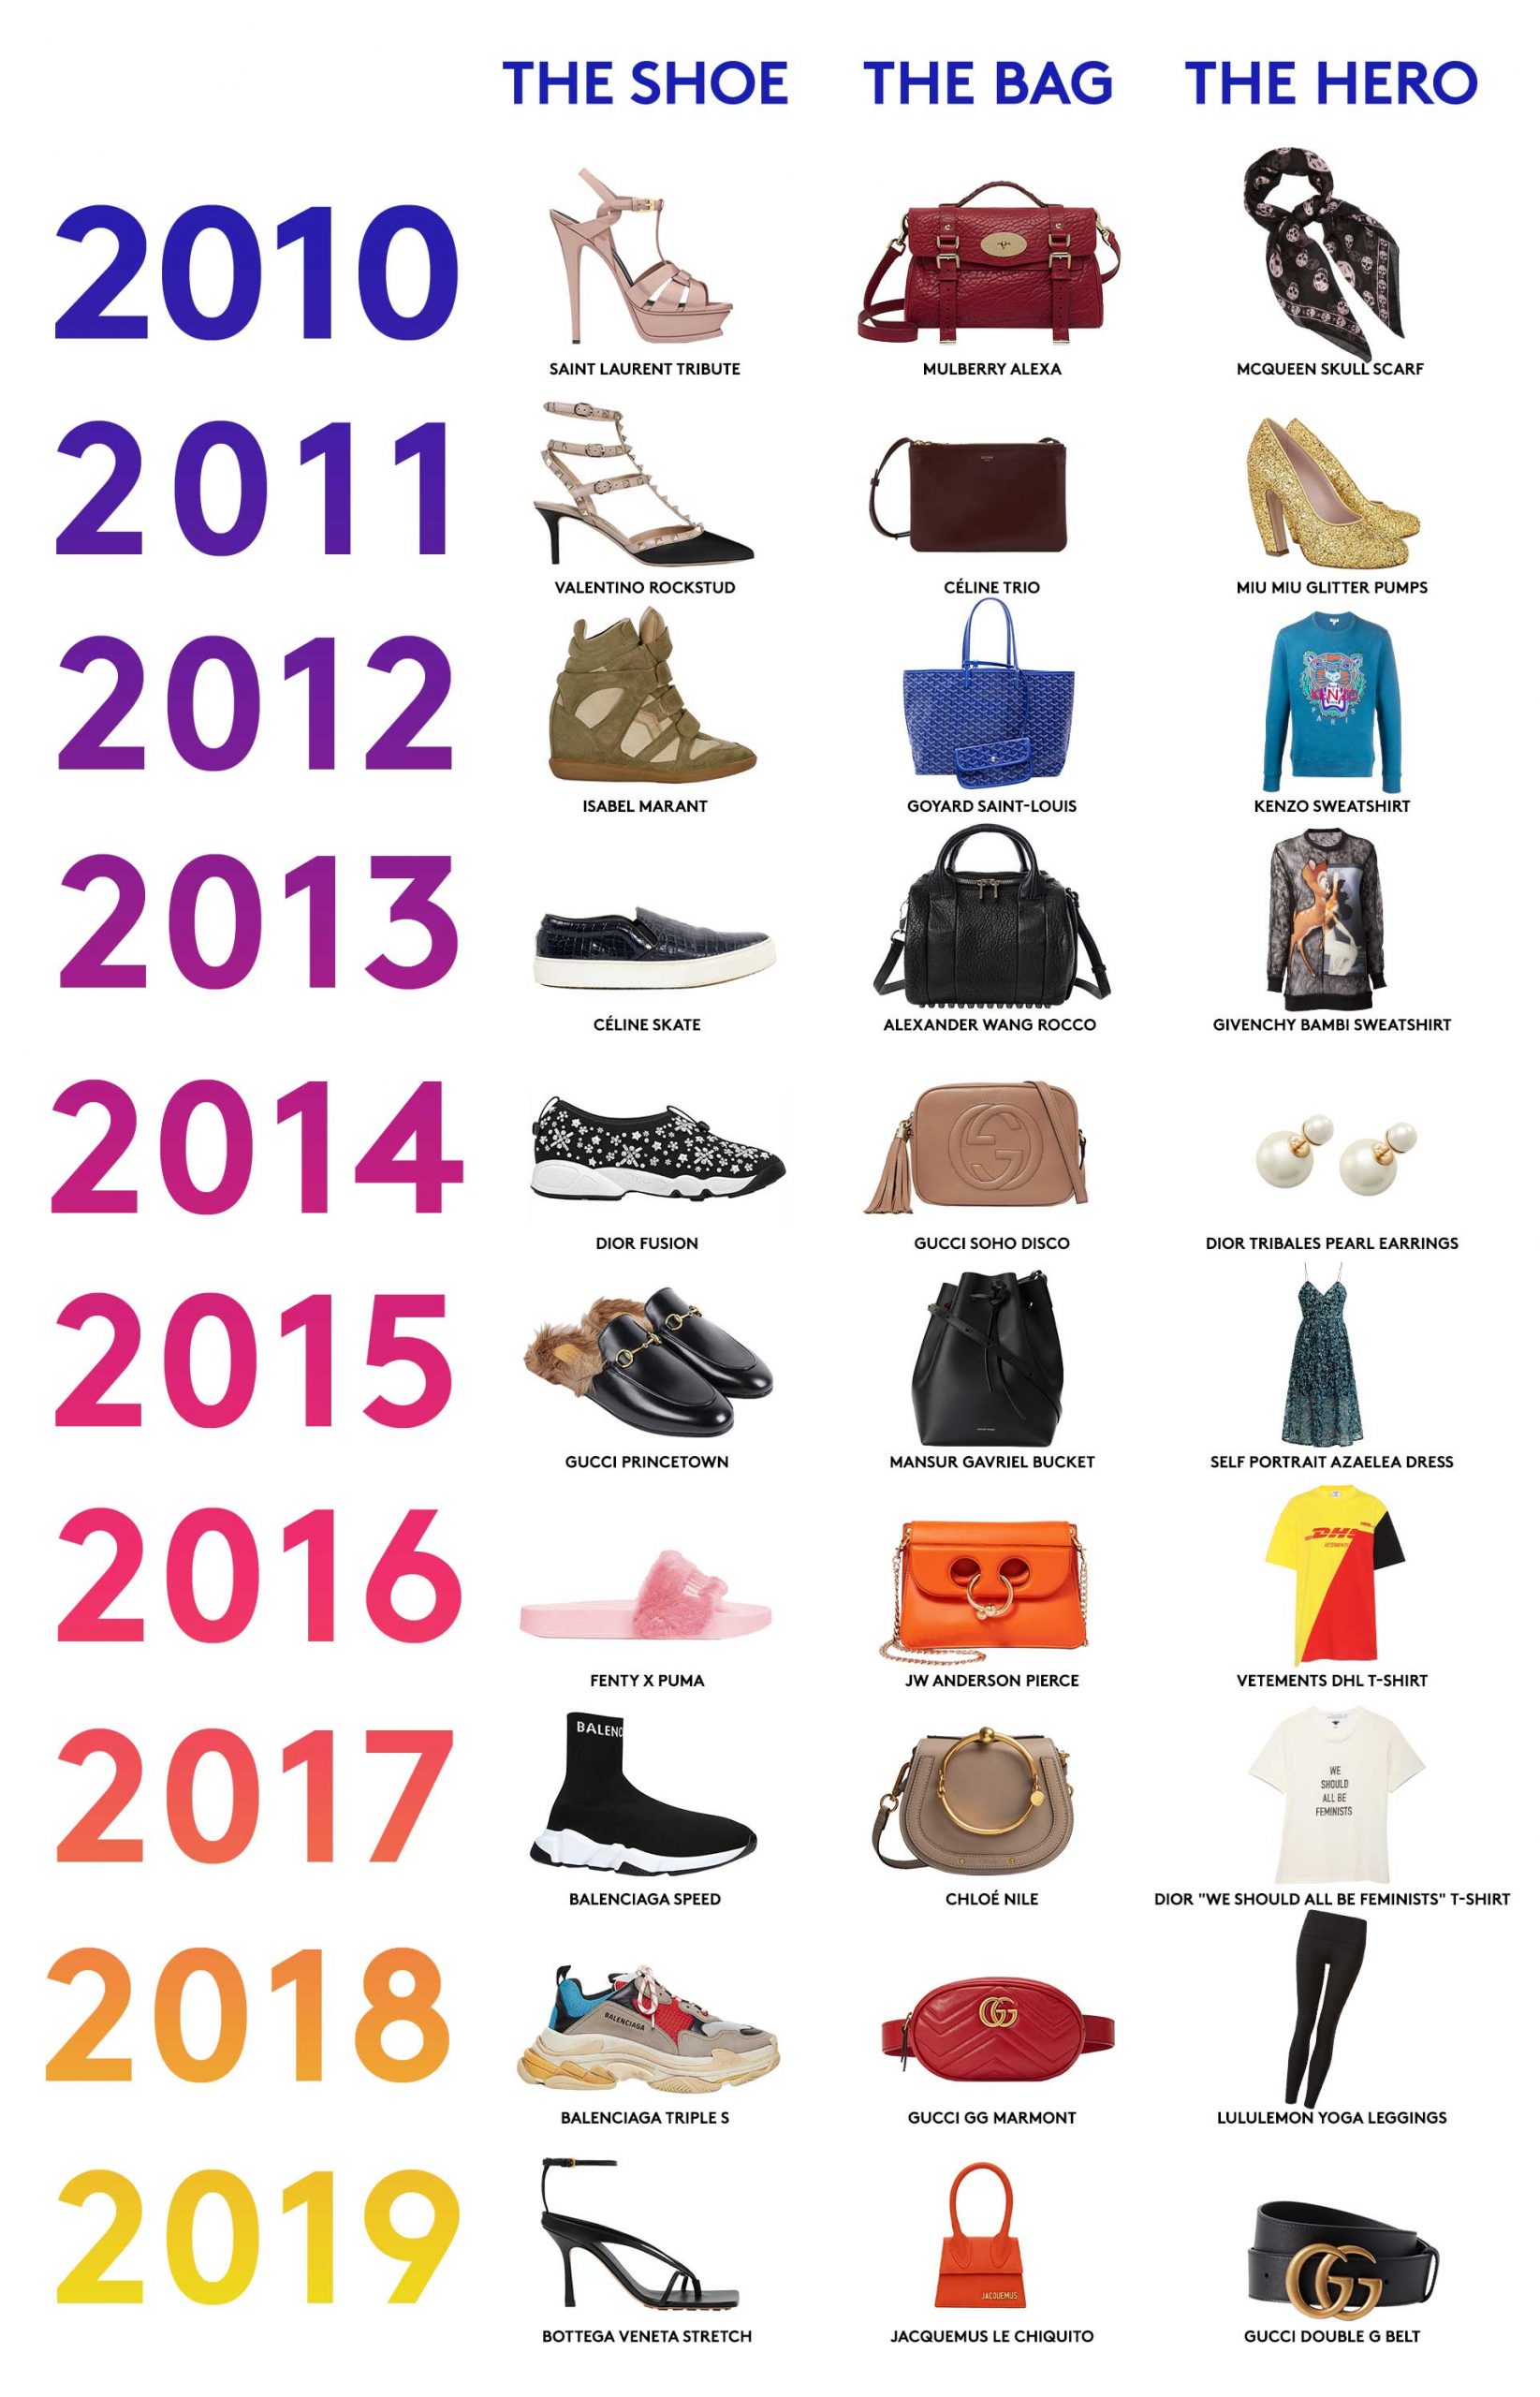 Top Fashion Collaborations of the Decade 2010-2019